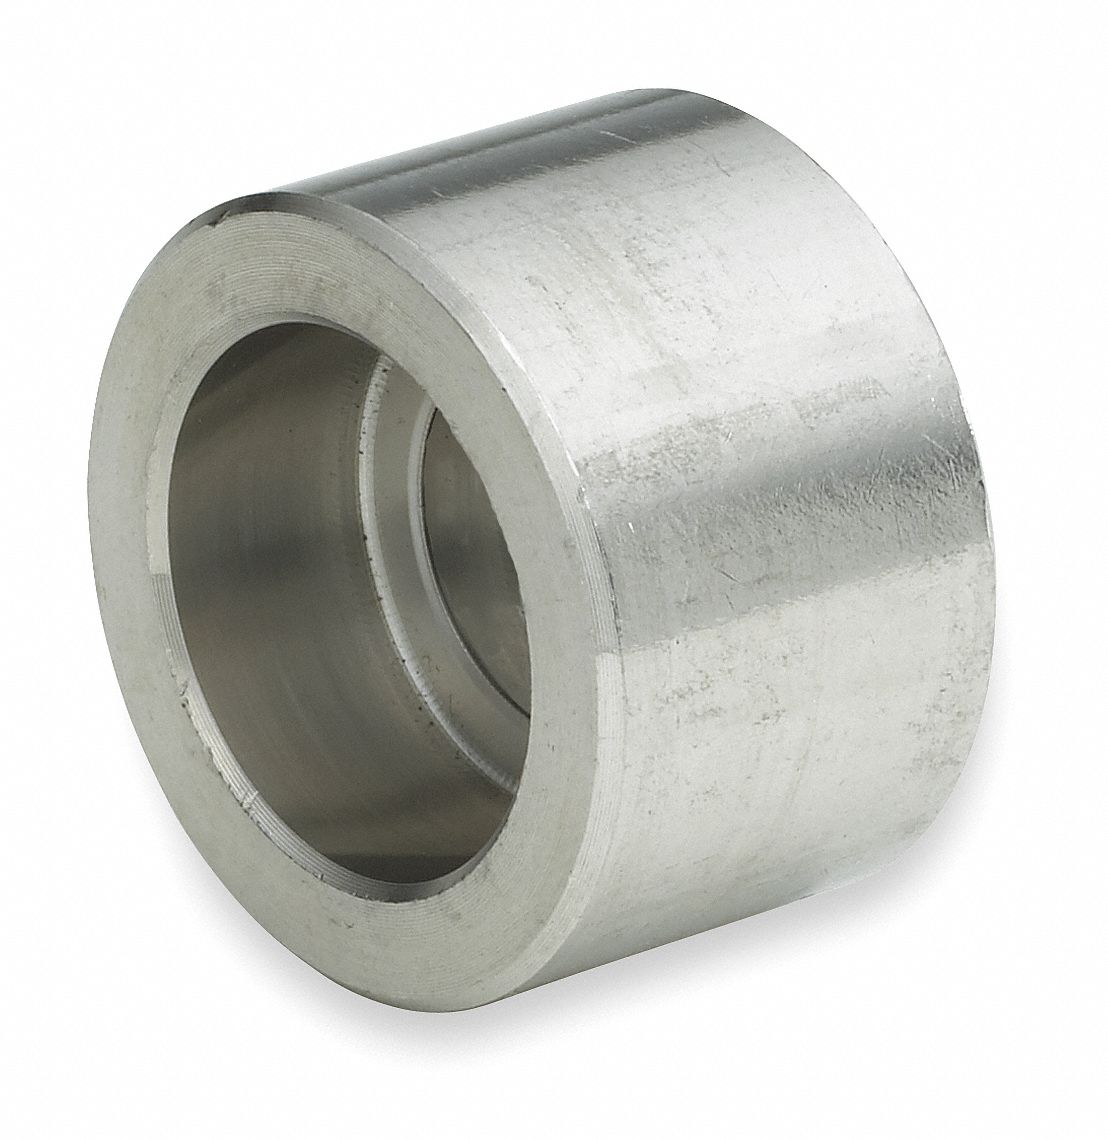 304 Stainless Steel 14 In X 14 In Fitting Pipe Size Half Coupling 2ue114307004404 Grainger 3800